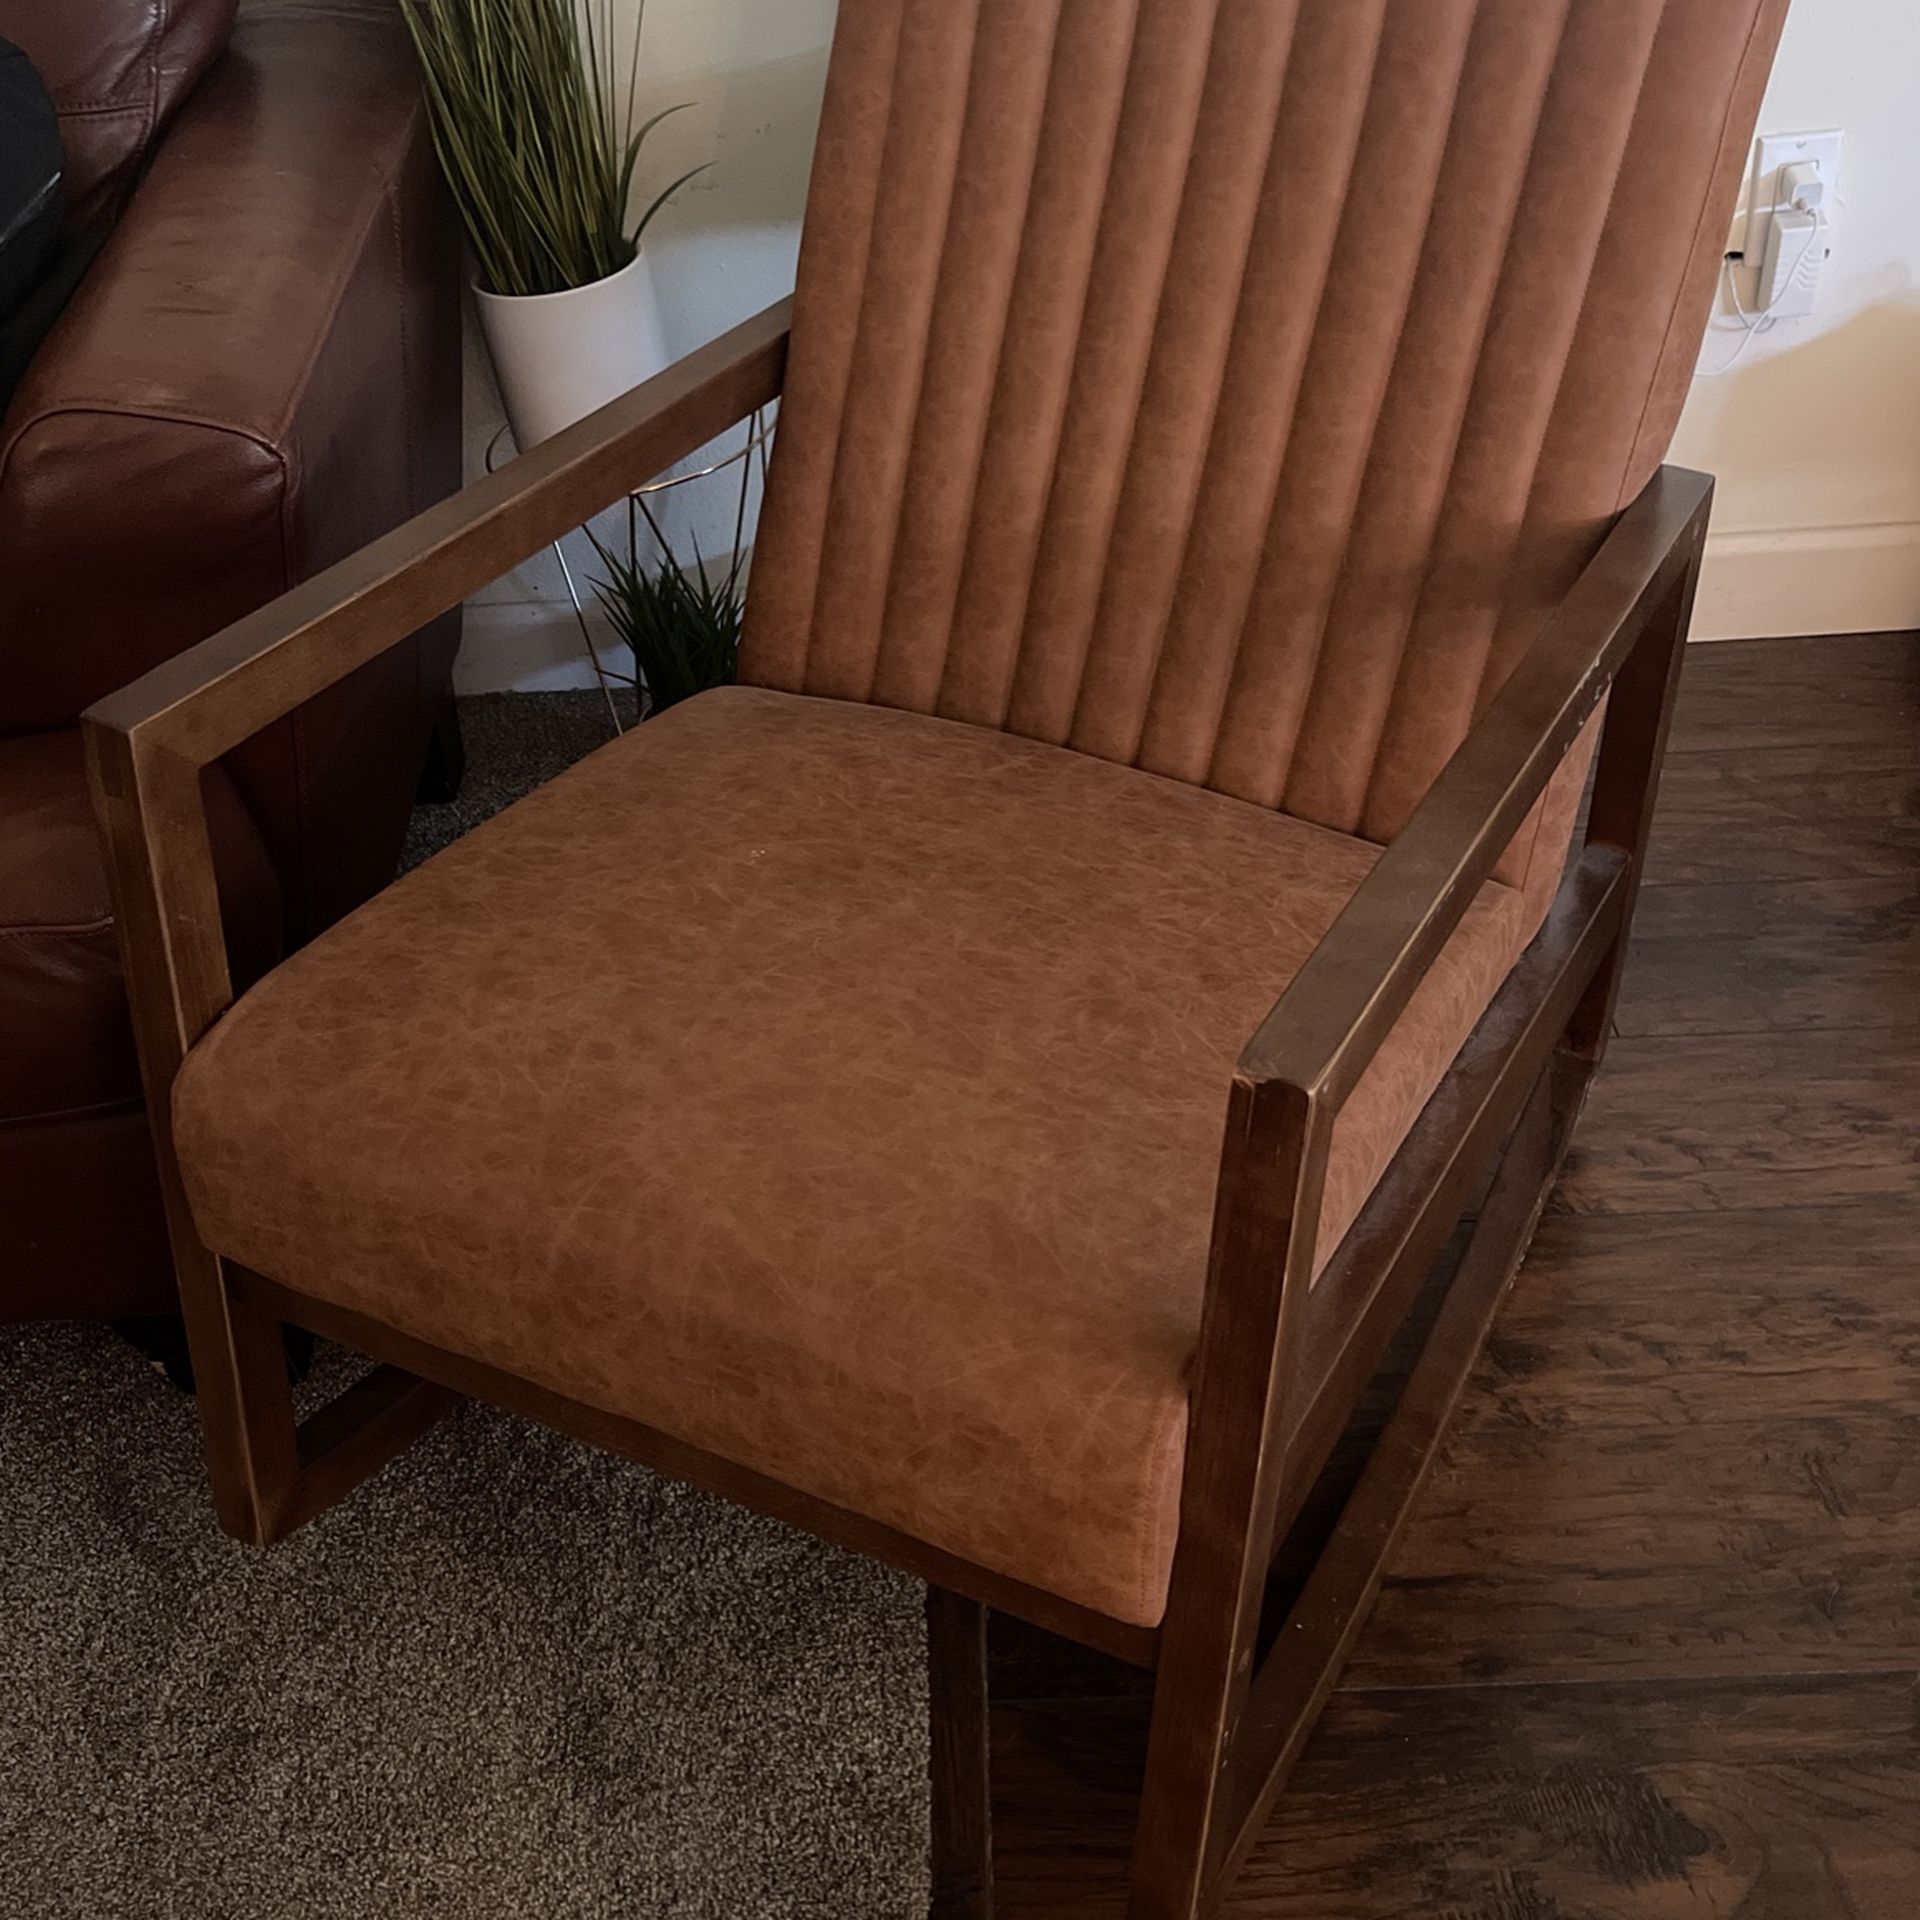 Comfy Leather Rocking Chair Wooden Arms